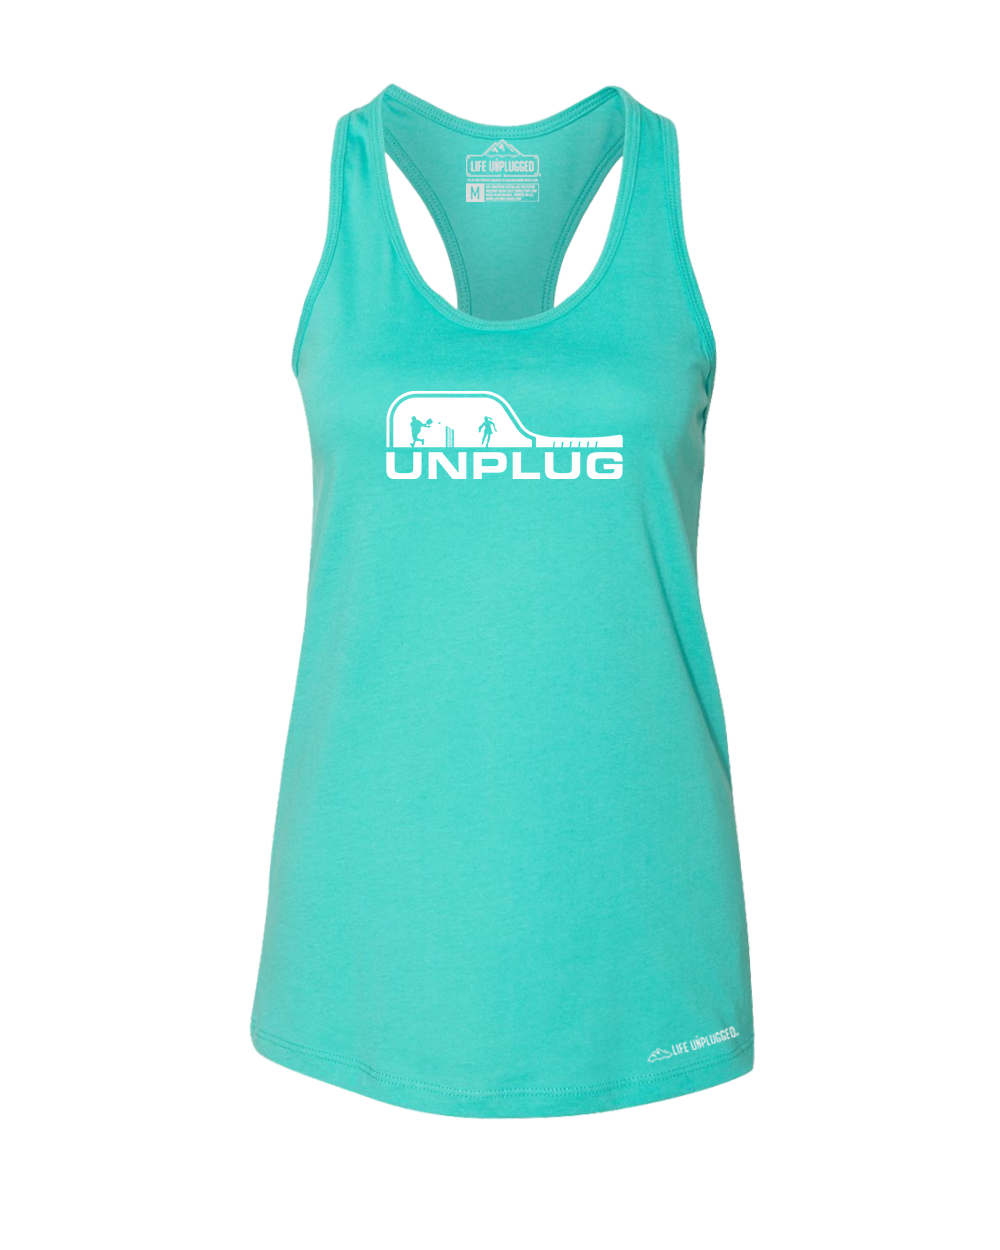 Pickleball Premium Women's Relaxed Fit Racerback Tank Top - Life Unplugged